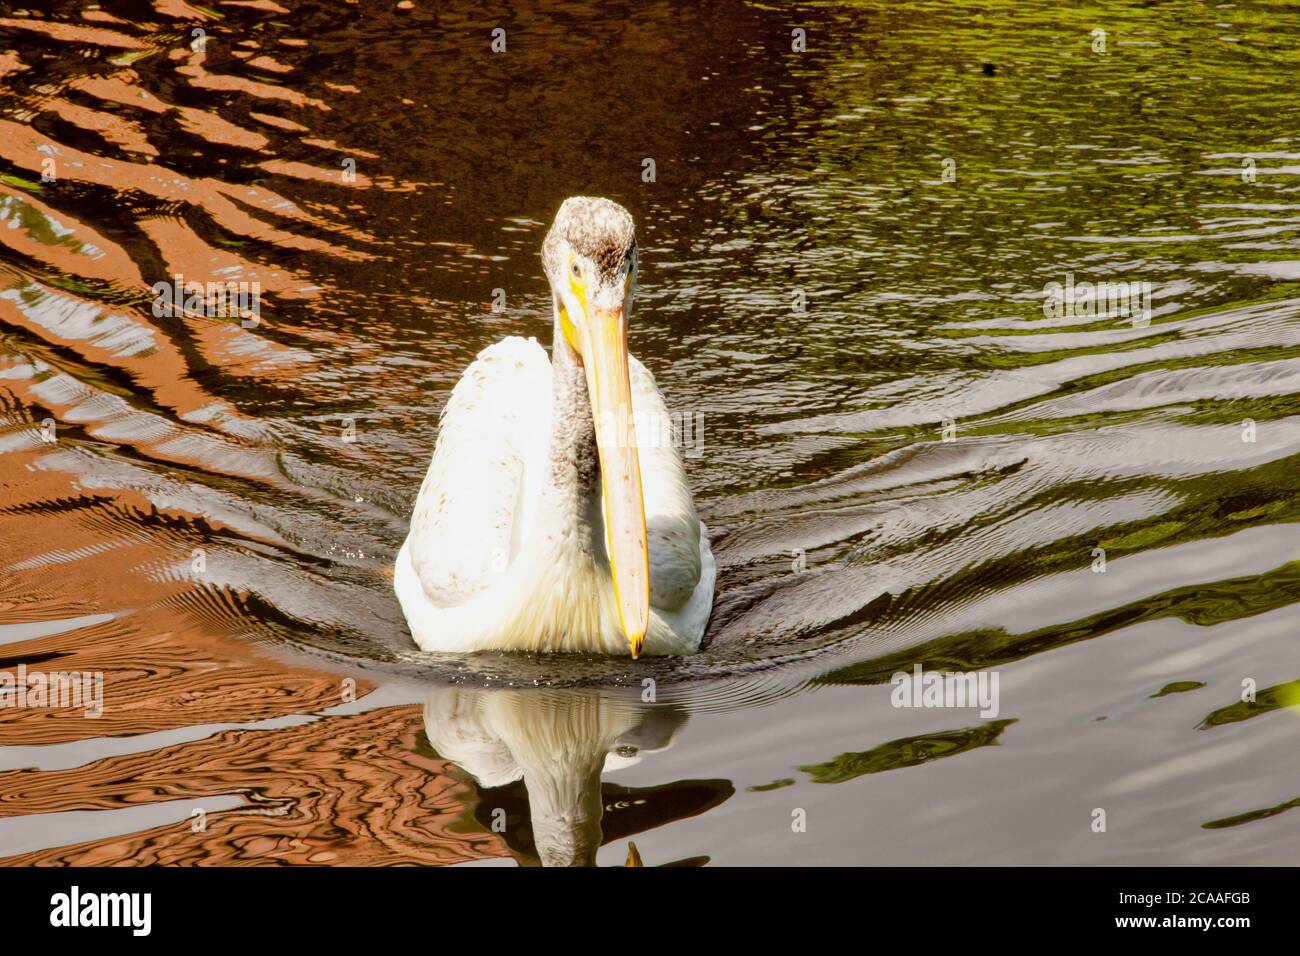 Front view of a swimming in the pond rough billed pelican, Pelecanus erythrorhynchos, one of the largest waterfowl in the world Stock Photo